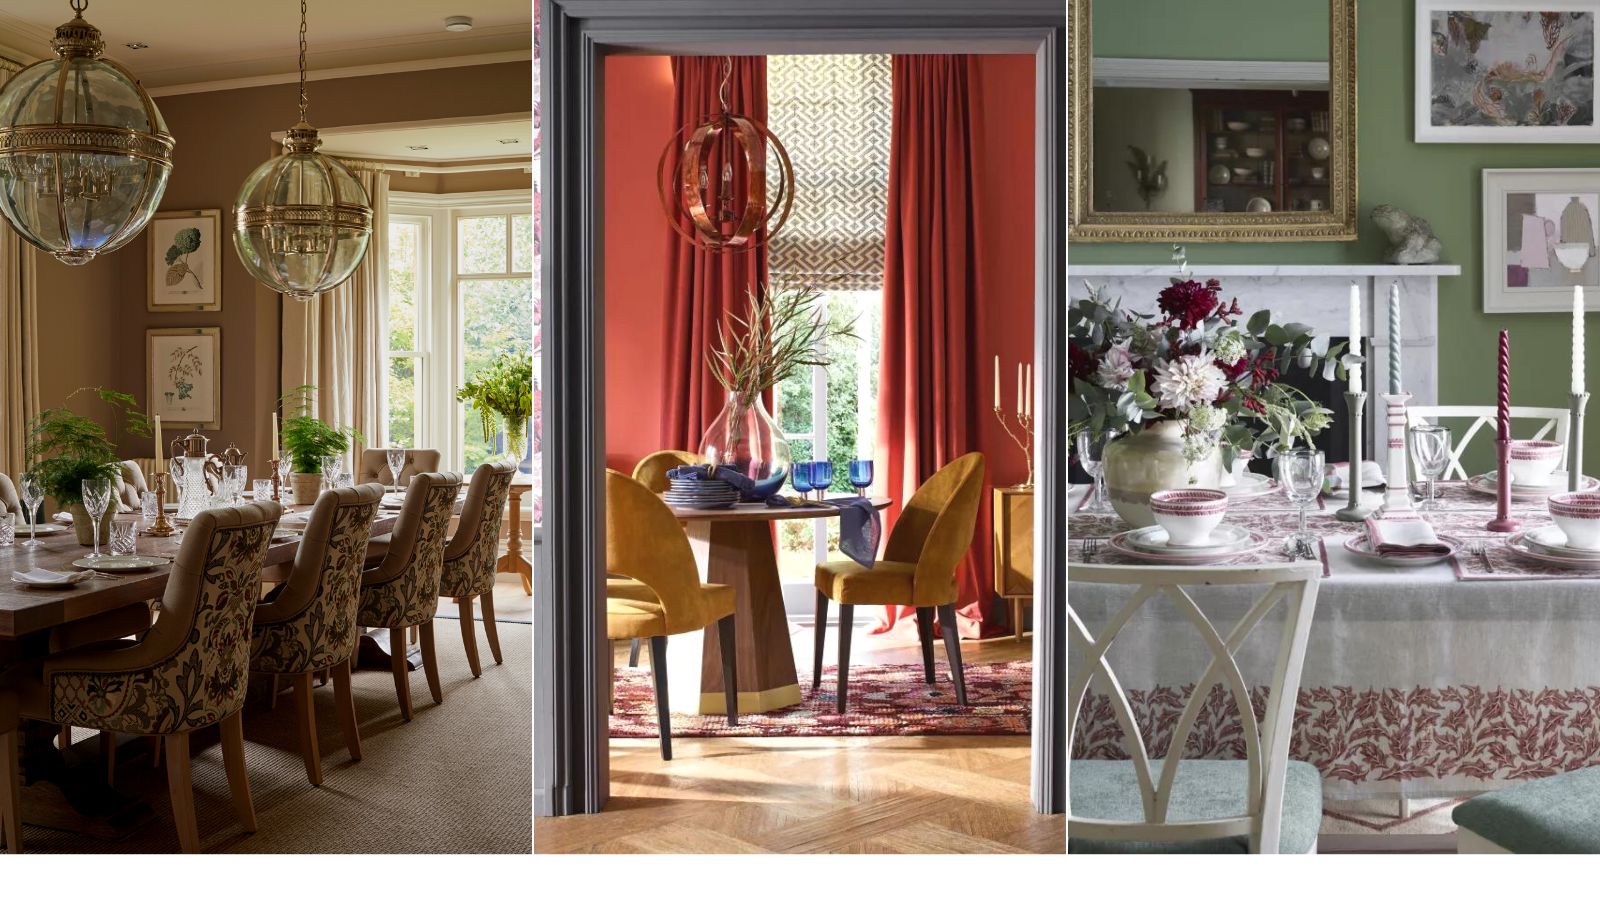 Dining room trends 2022 – 7 key ways to update your dining space